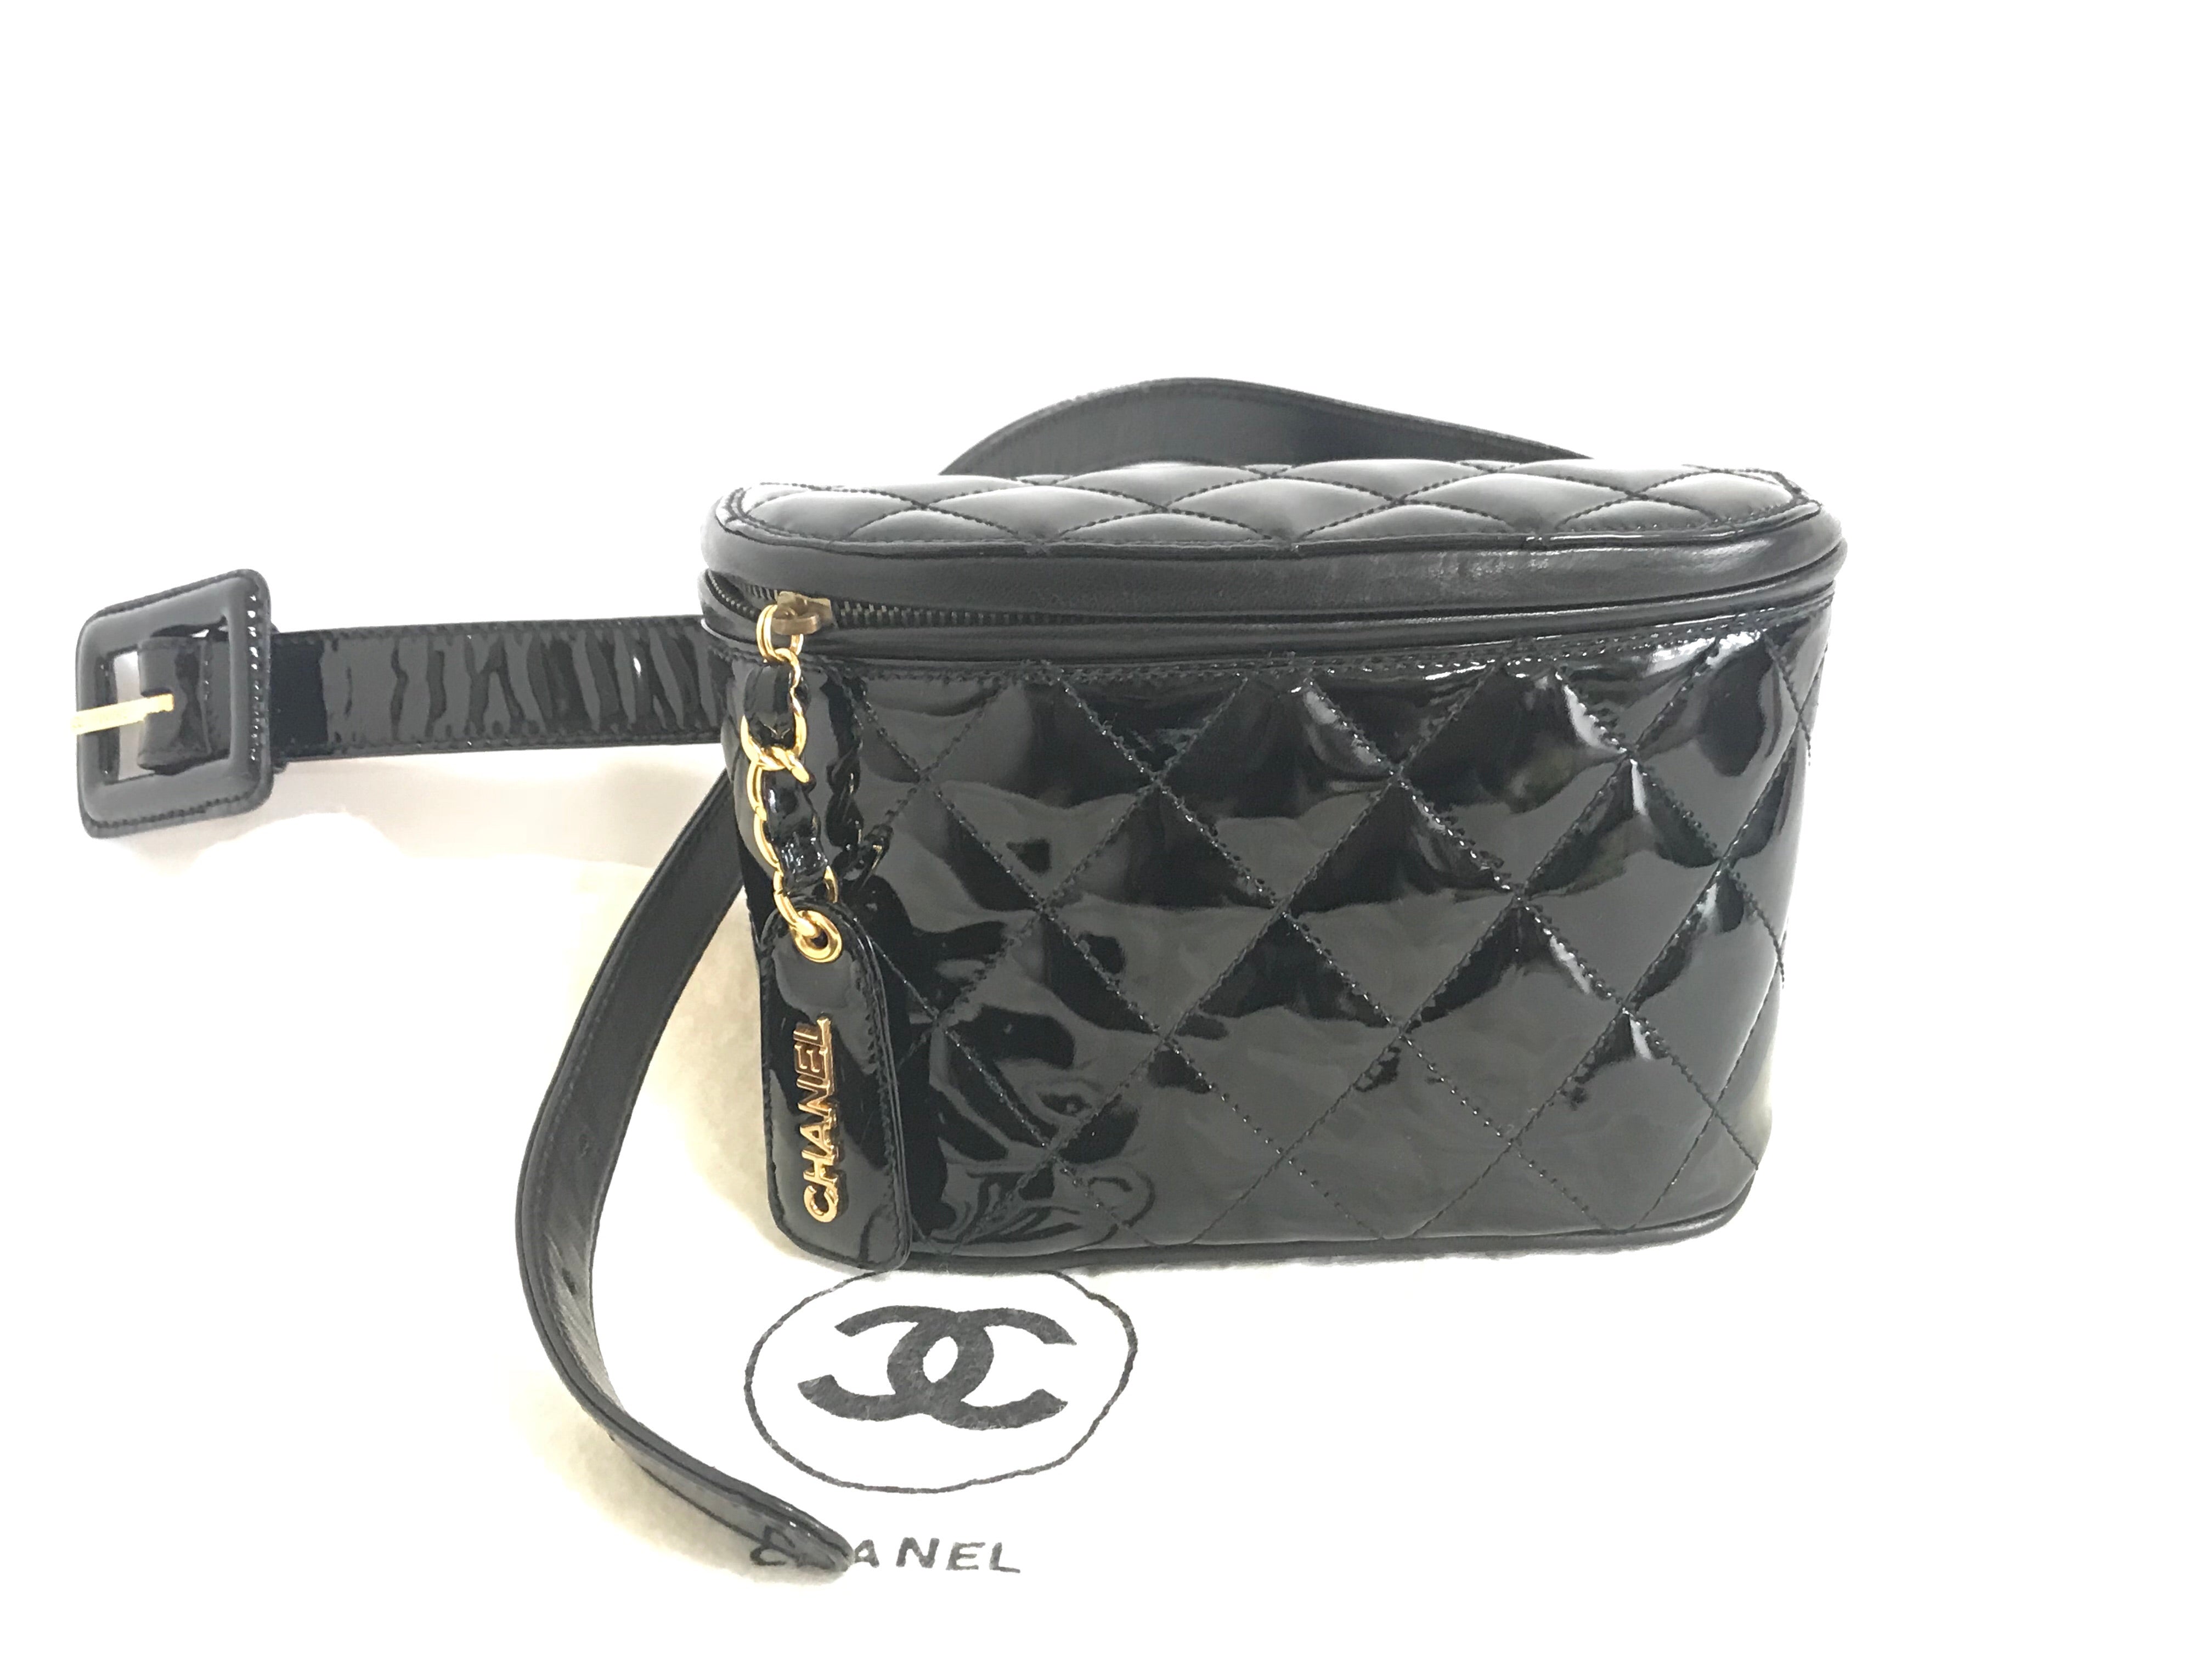 MINT. Vintage CHANEL black patent enamel leather fanny pack, hip bag, party clutch. Ariana Grande loves it too. Must have. Belt size 28”-30”